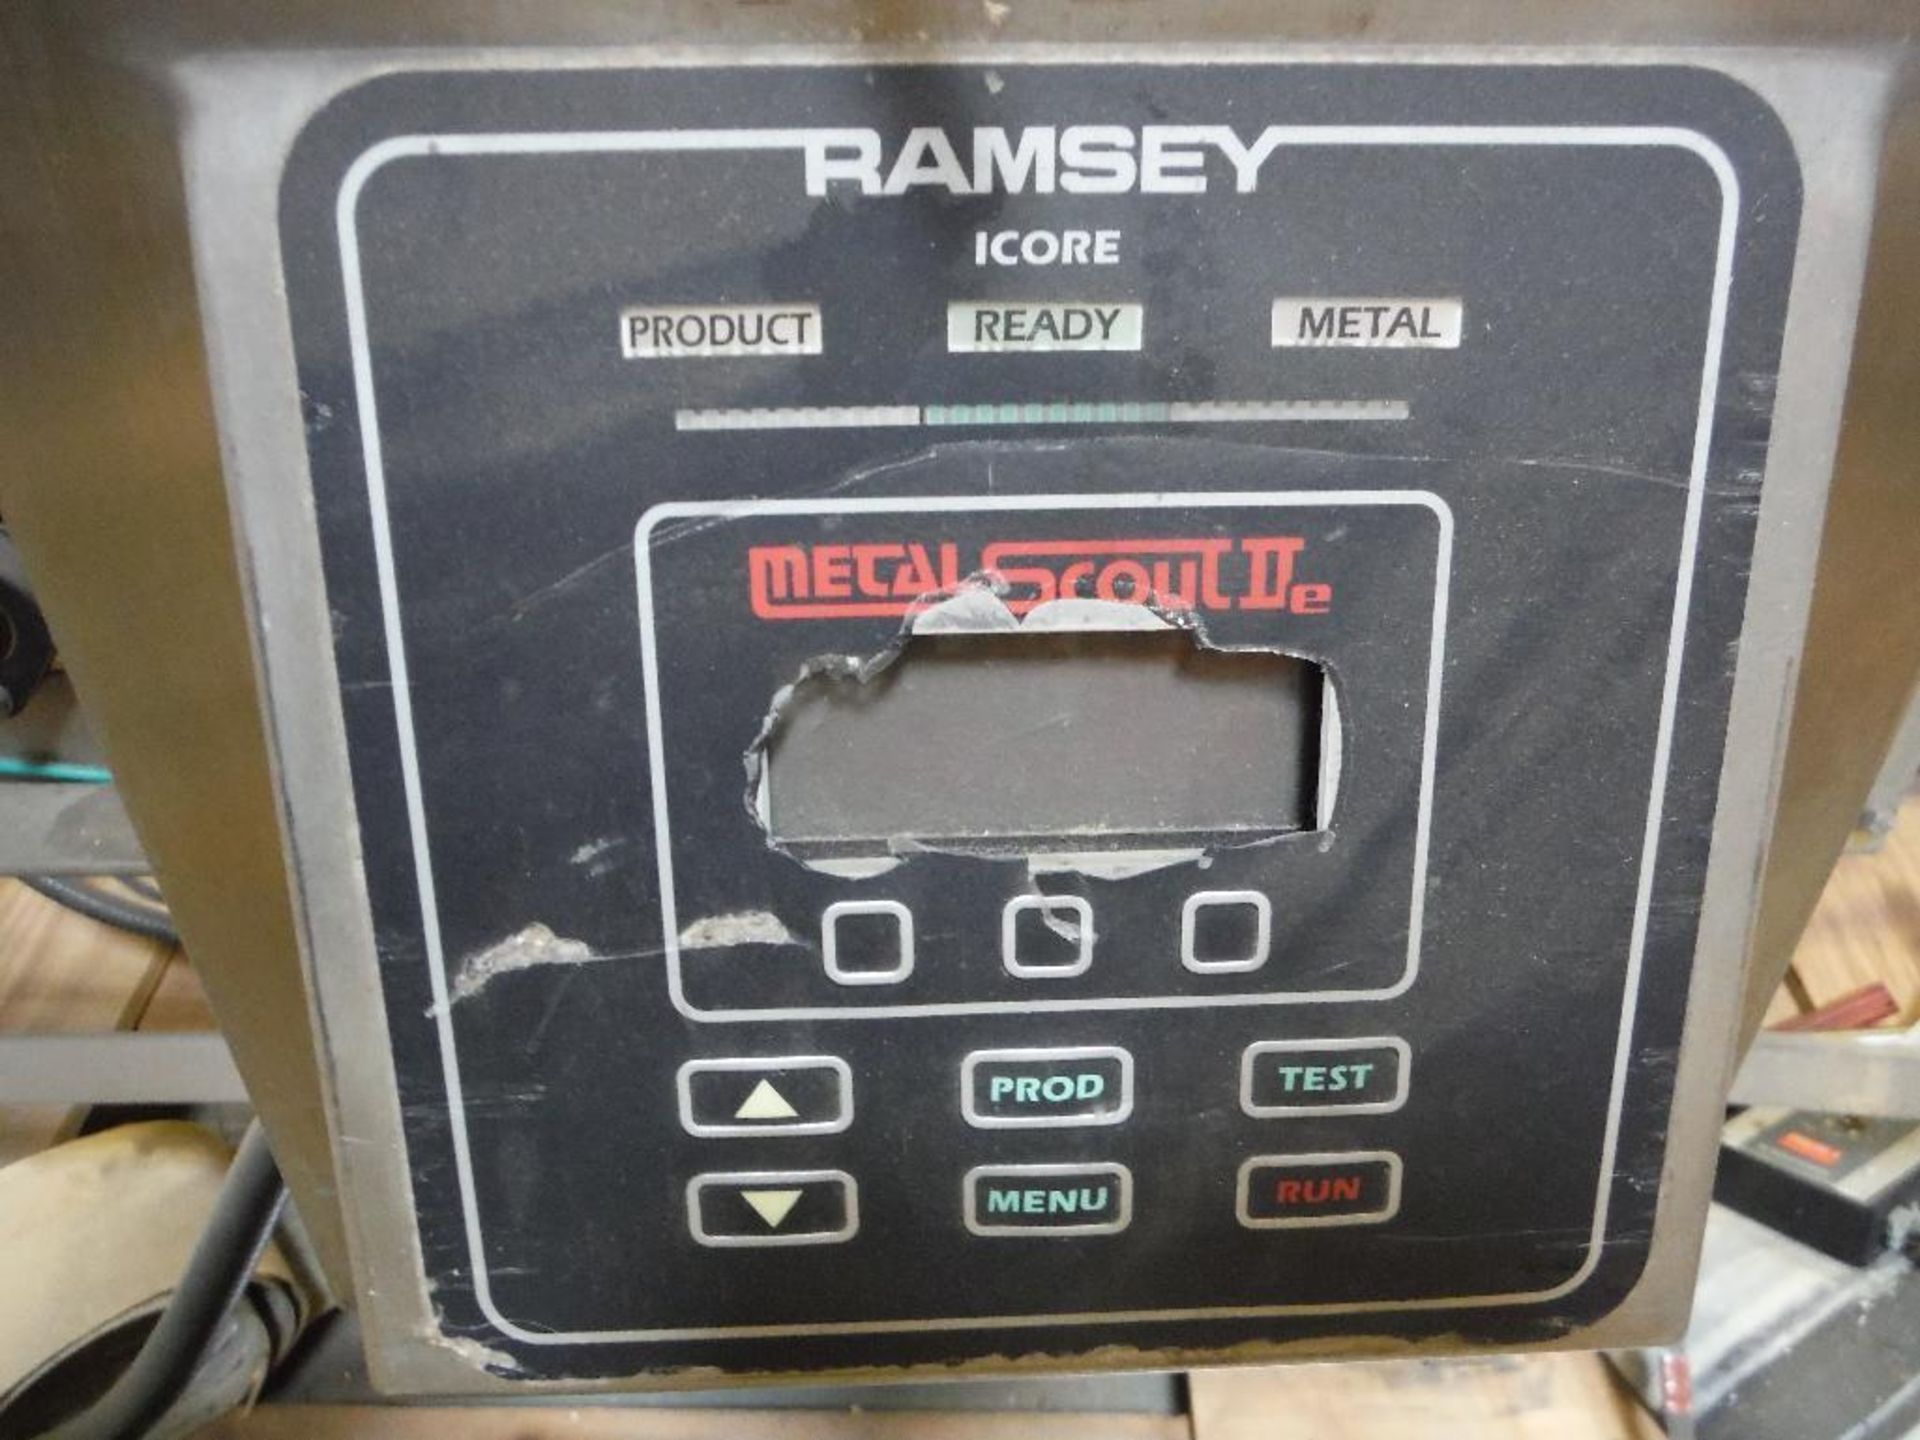 Ramsey Icore metal detector, 14 in. wide x 3 in. tall aperture, SS frame, motor and drive **Rigging - Image 3 of 7